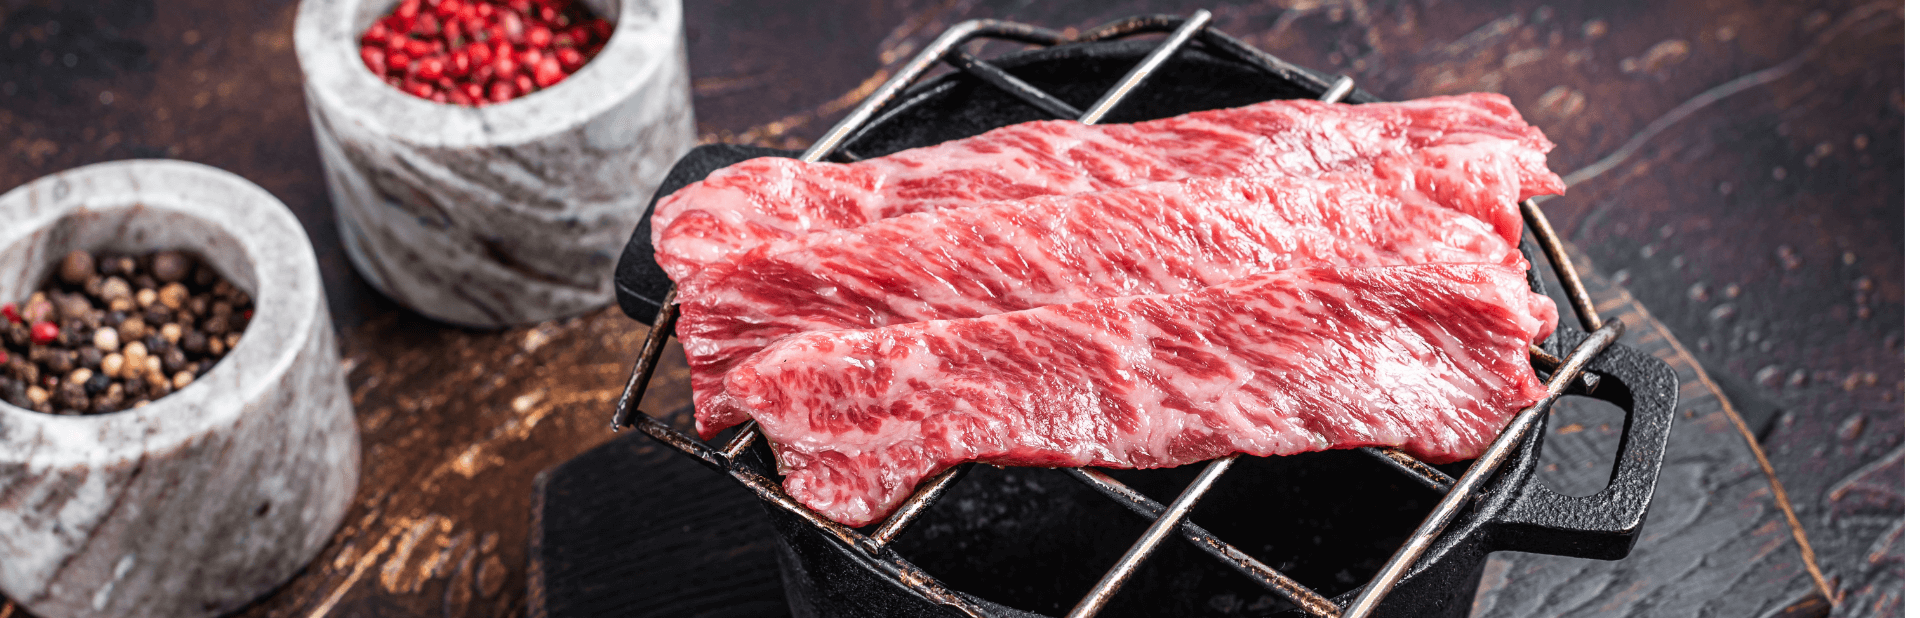 premium raw sliced wagyu beef a5 steaks on a grill